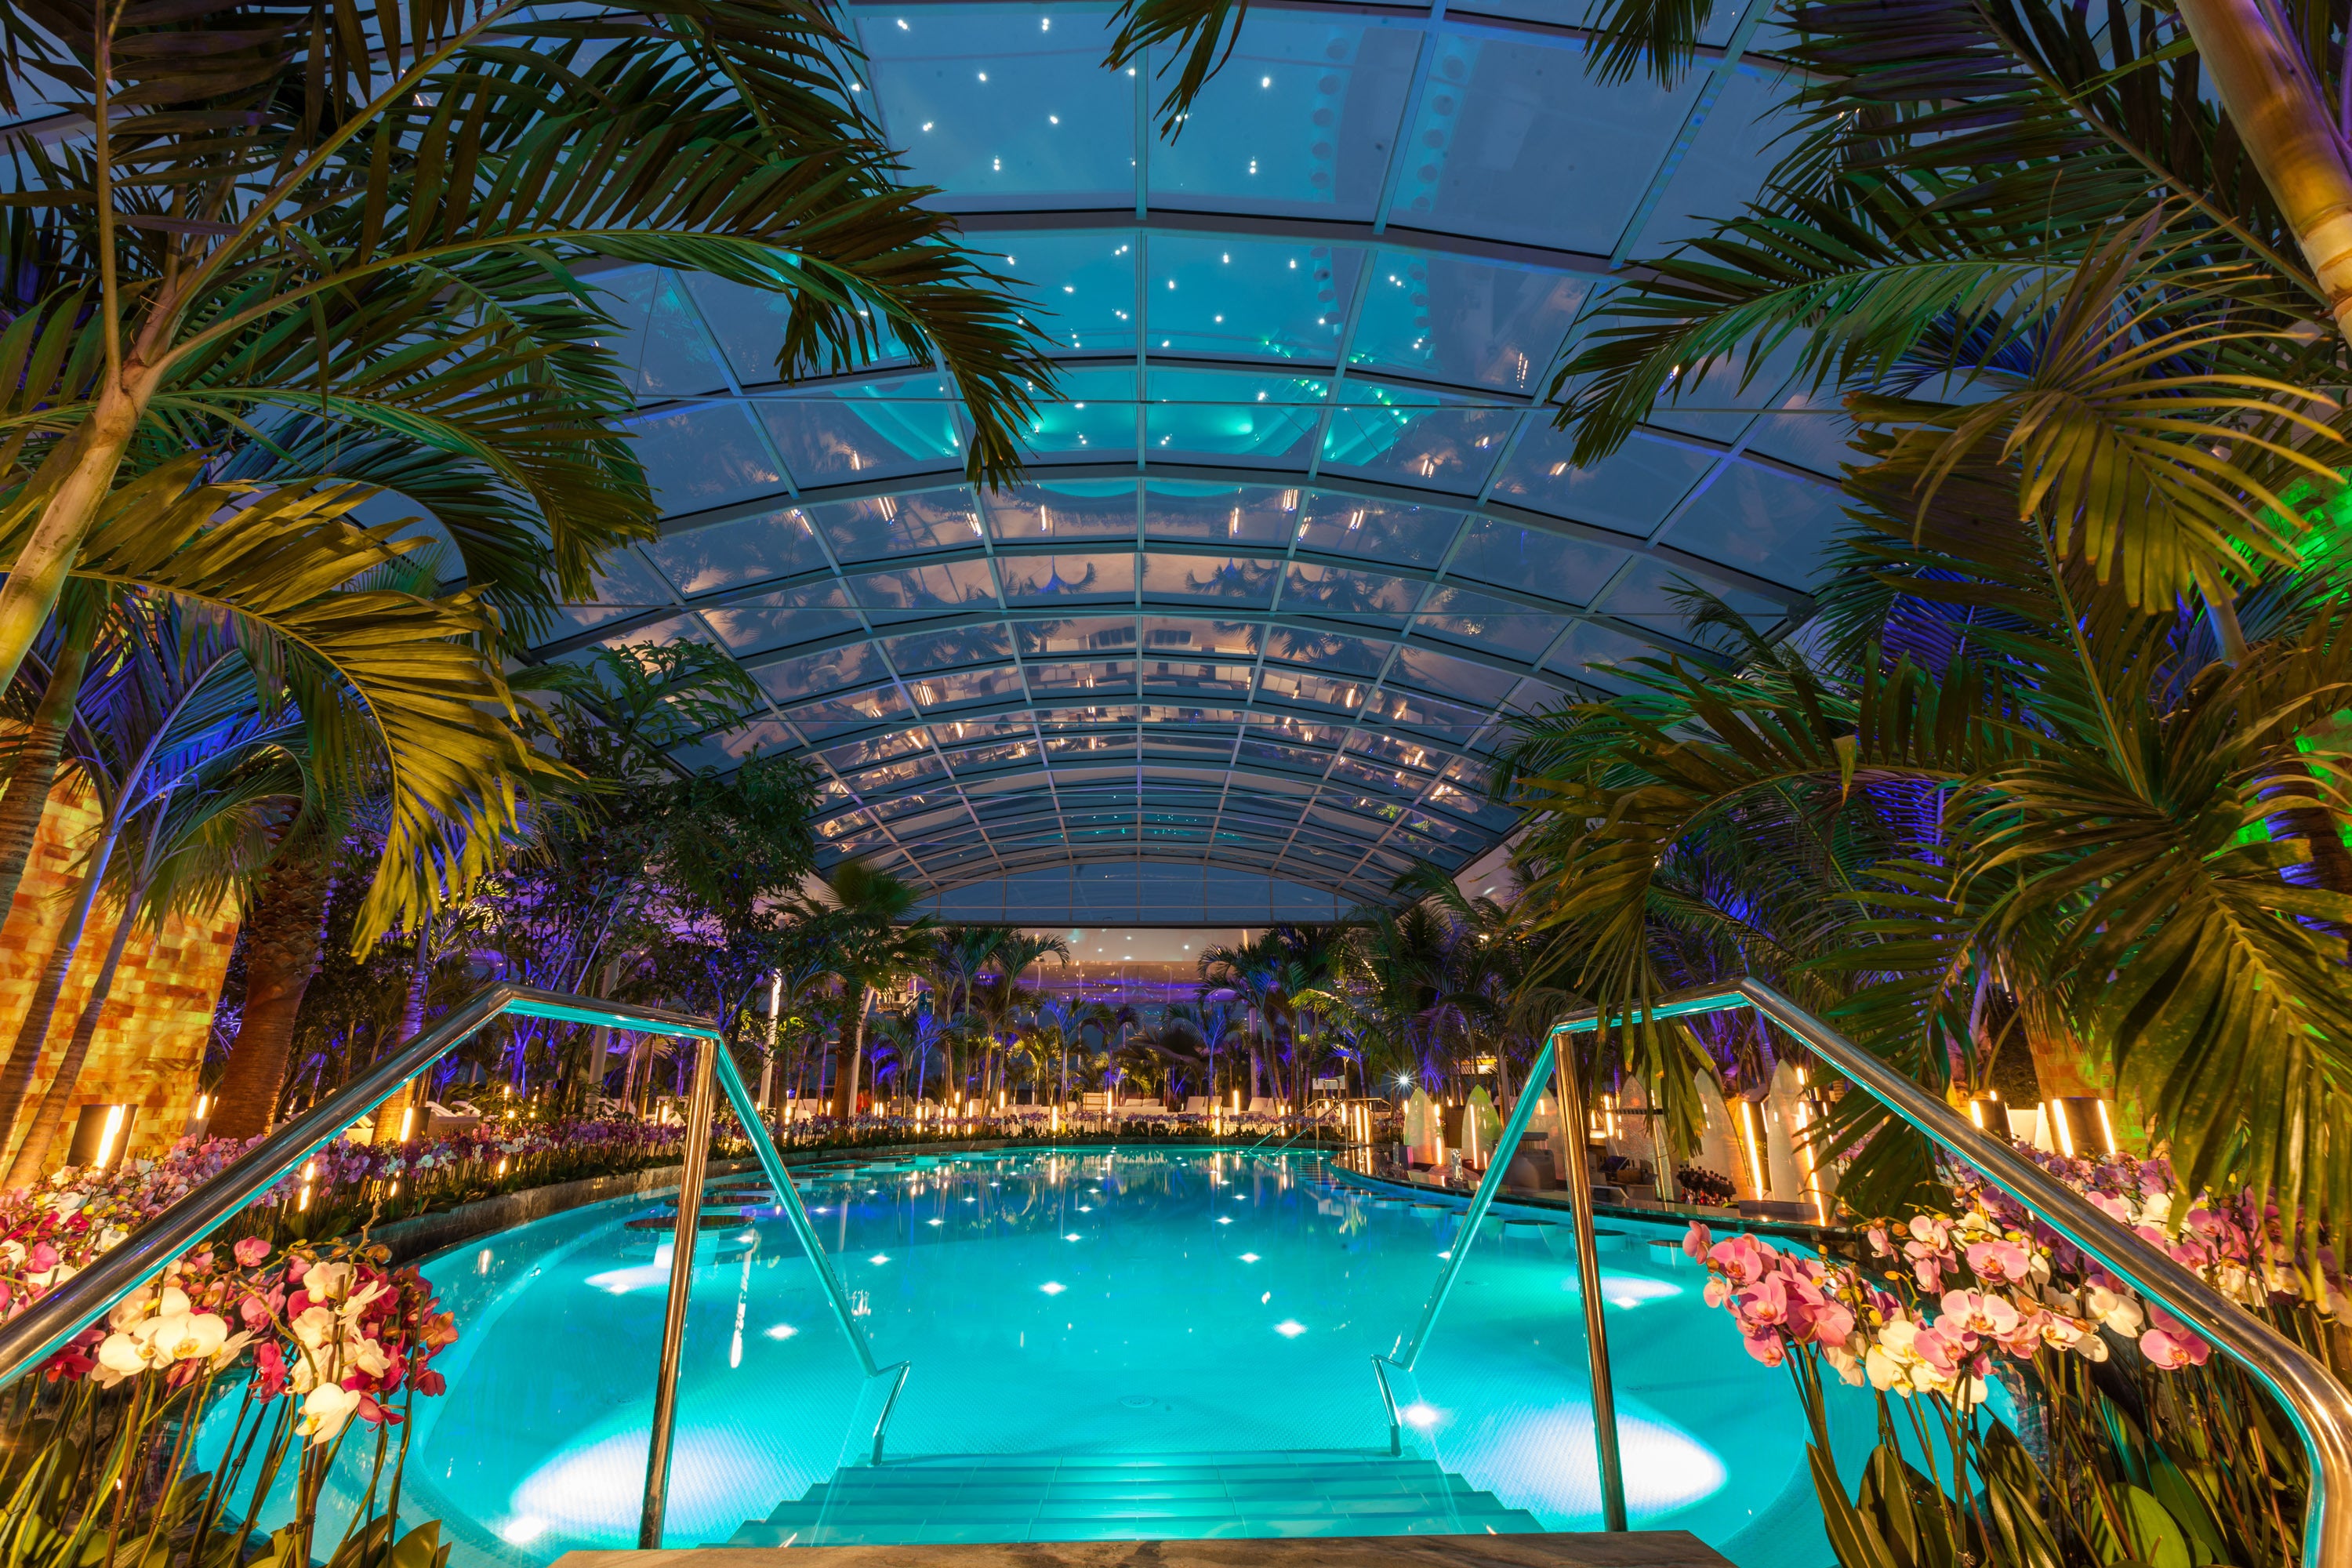 Spa under the stars at Therme, which is open until midnight